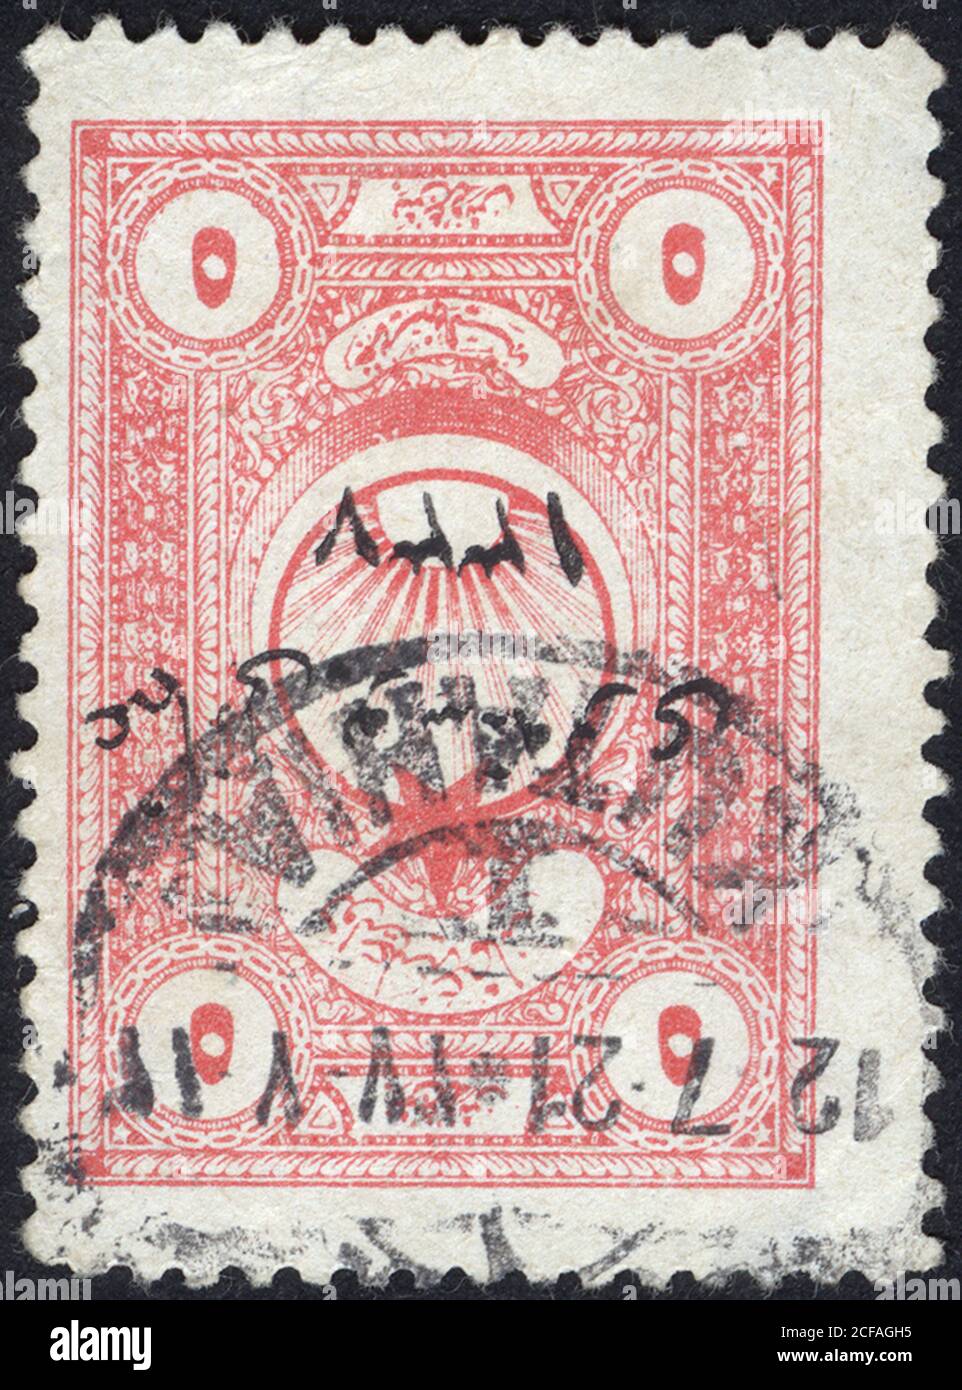 Postage stamps of the Ottoman Empire. Stamp printed in the Ottoman Empire. Stamp printed by Ottoman Empire. Stock Photo